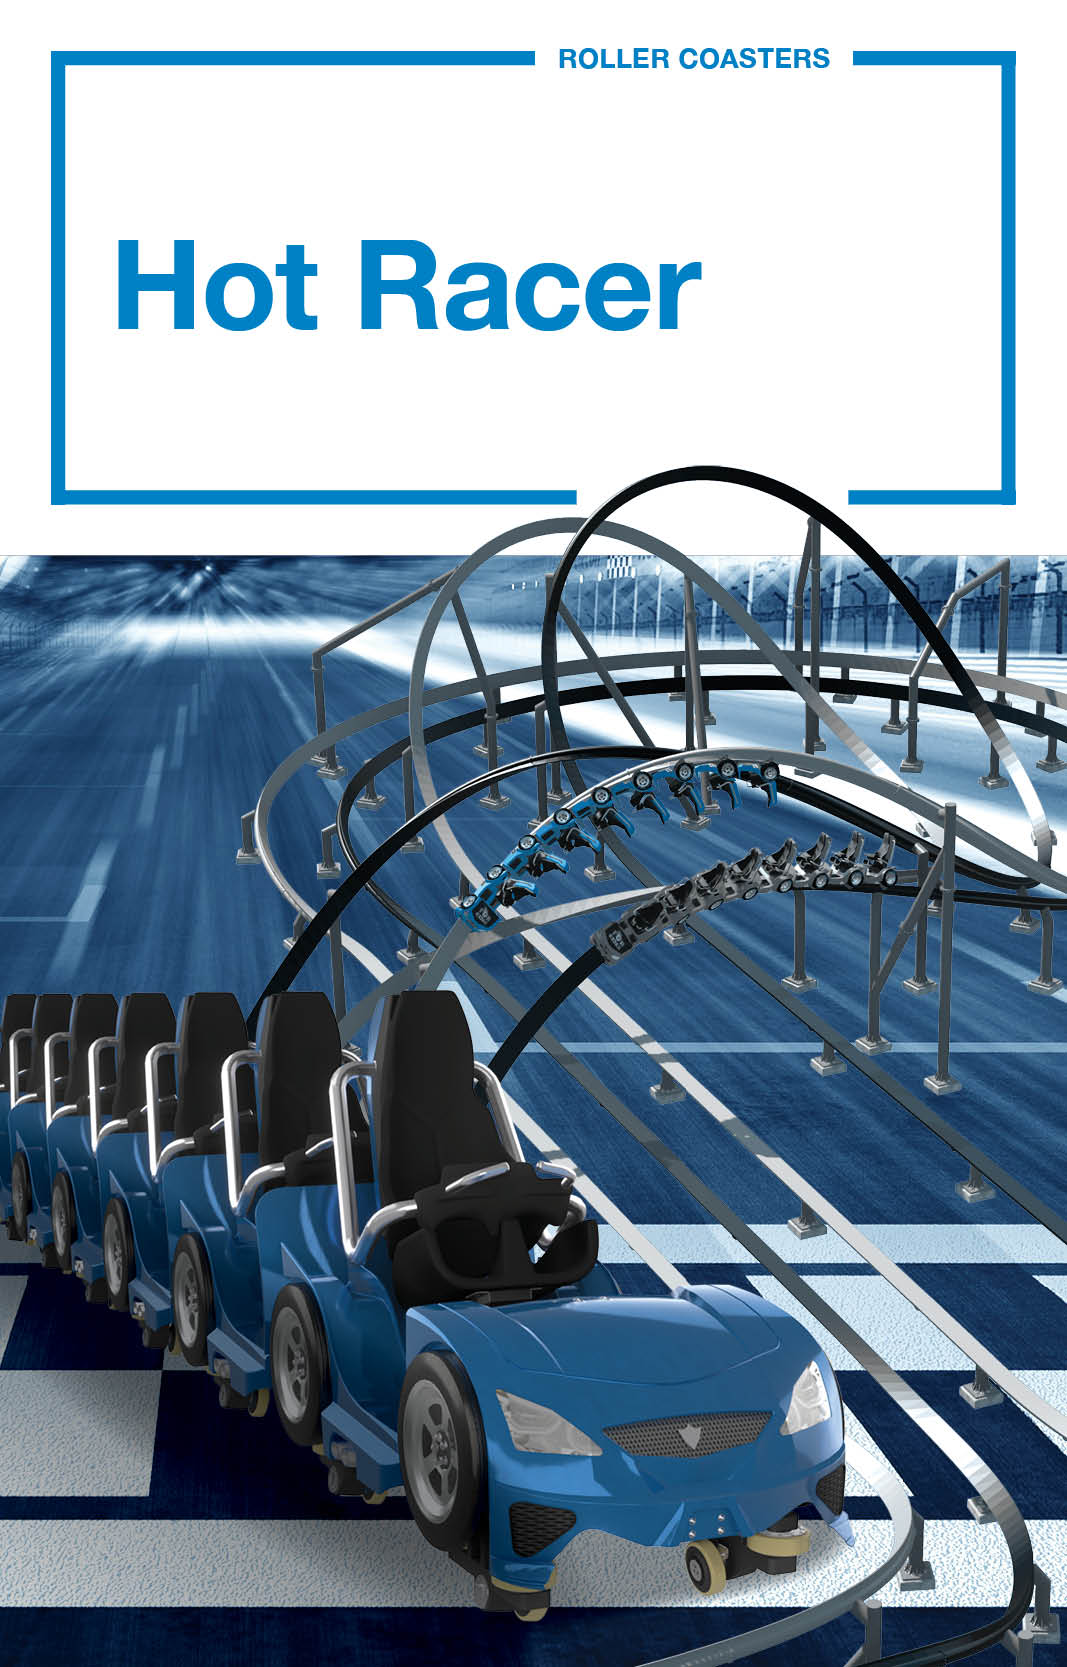 Hot Racer – Launched Single-Rail Roller Coaster